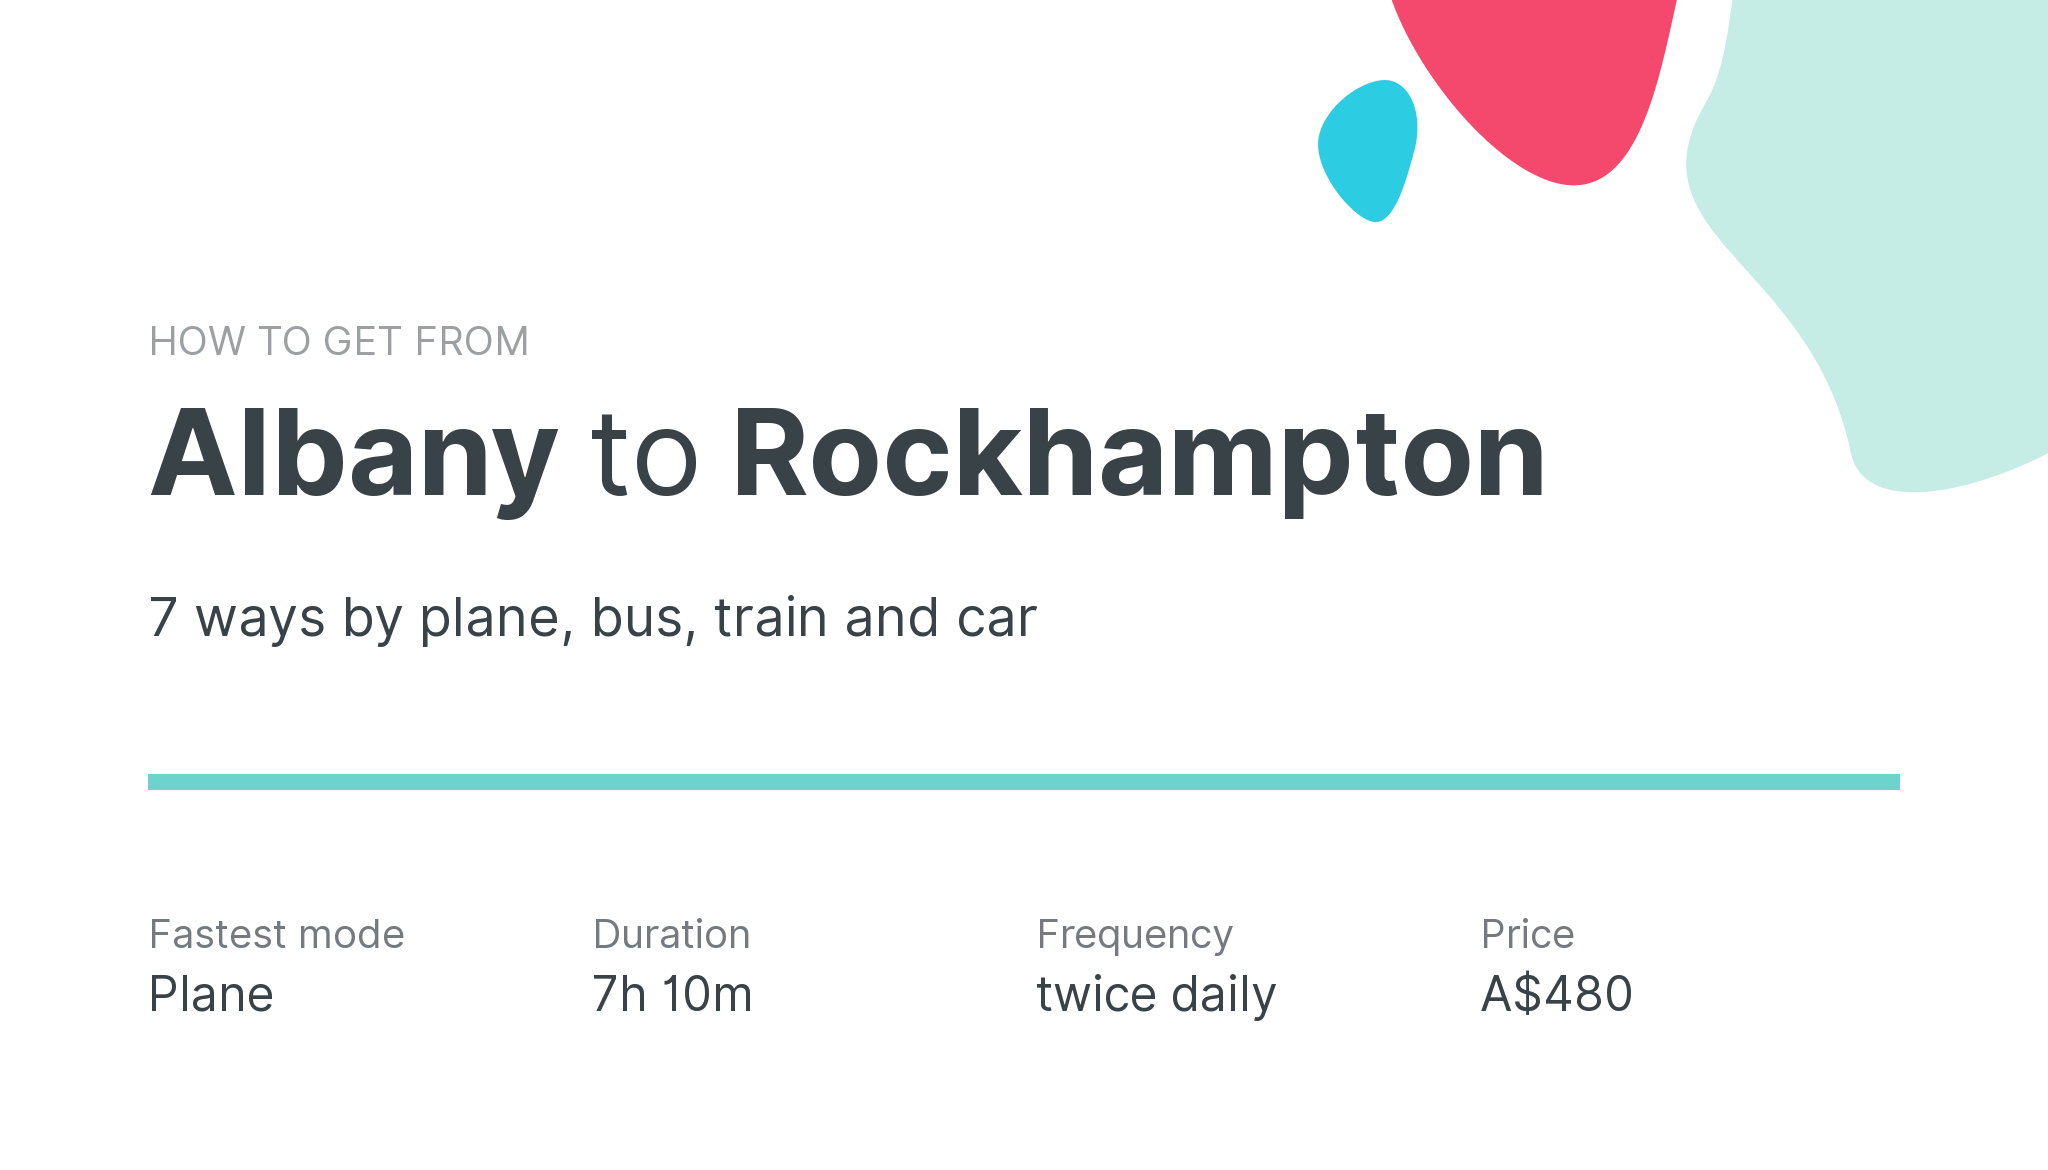 How do I get from Albany to Rockhampton